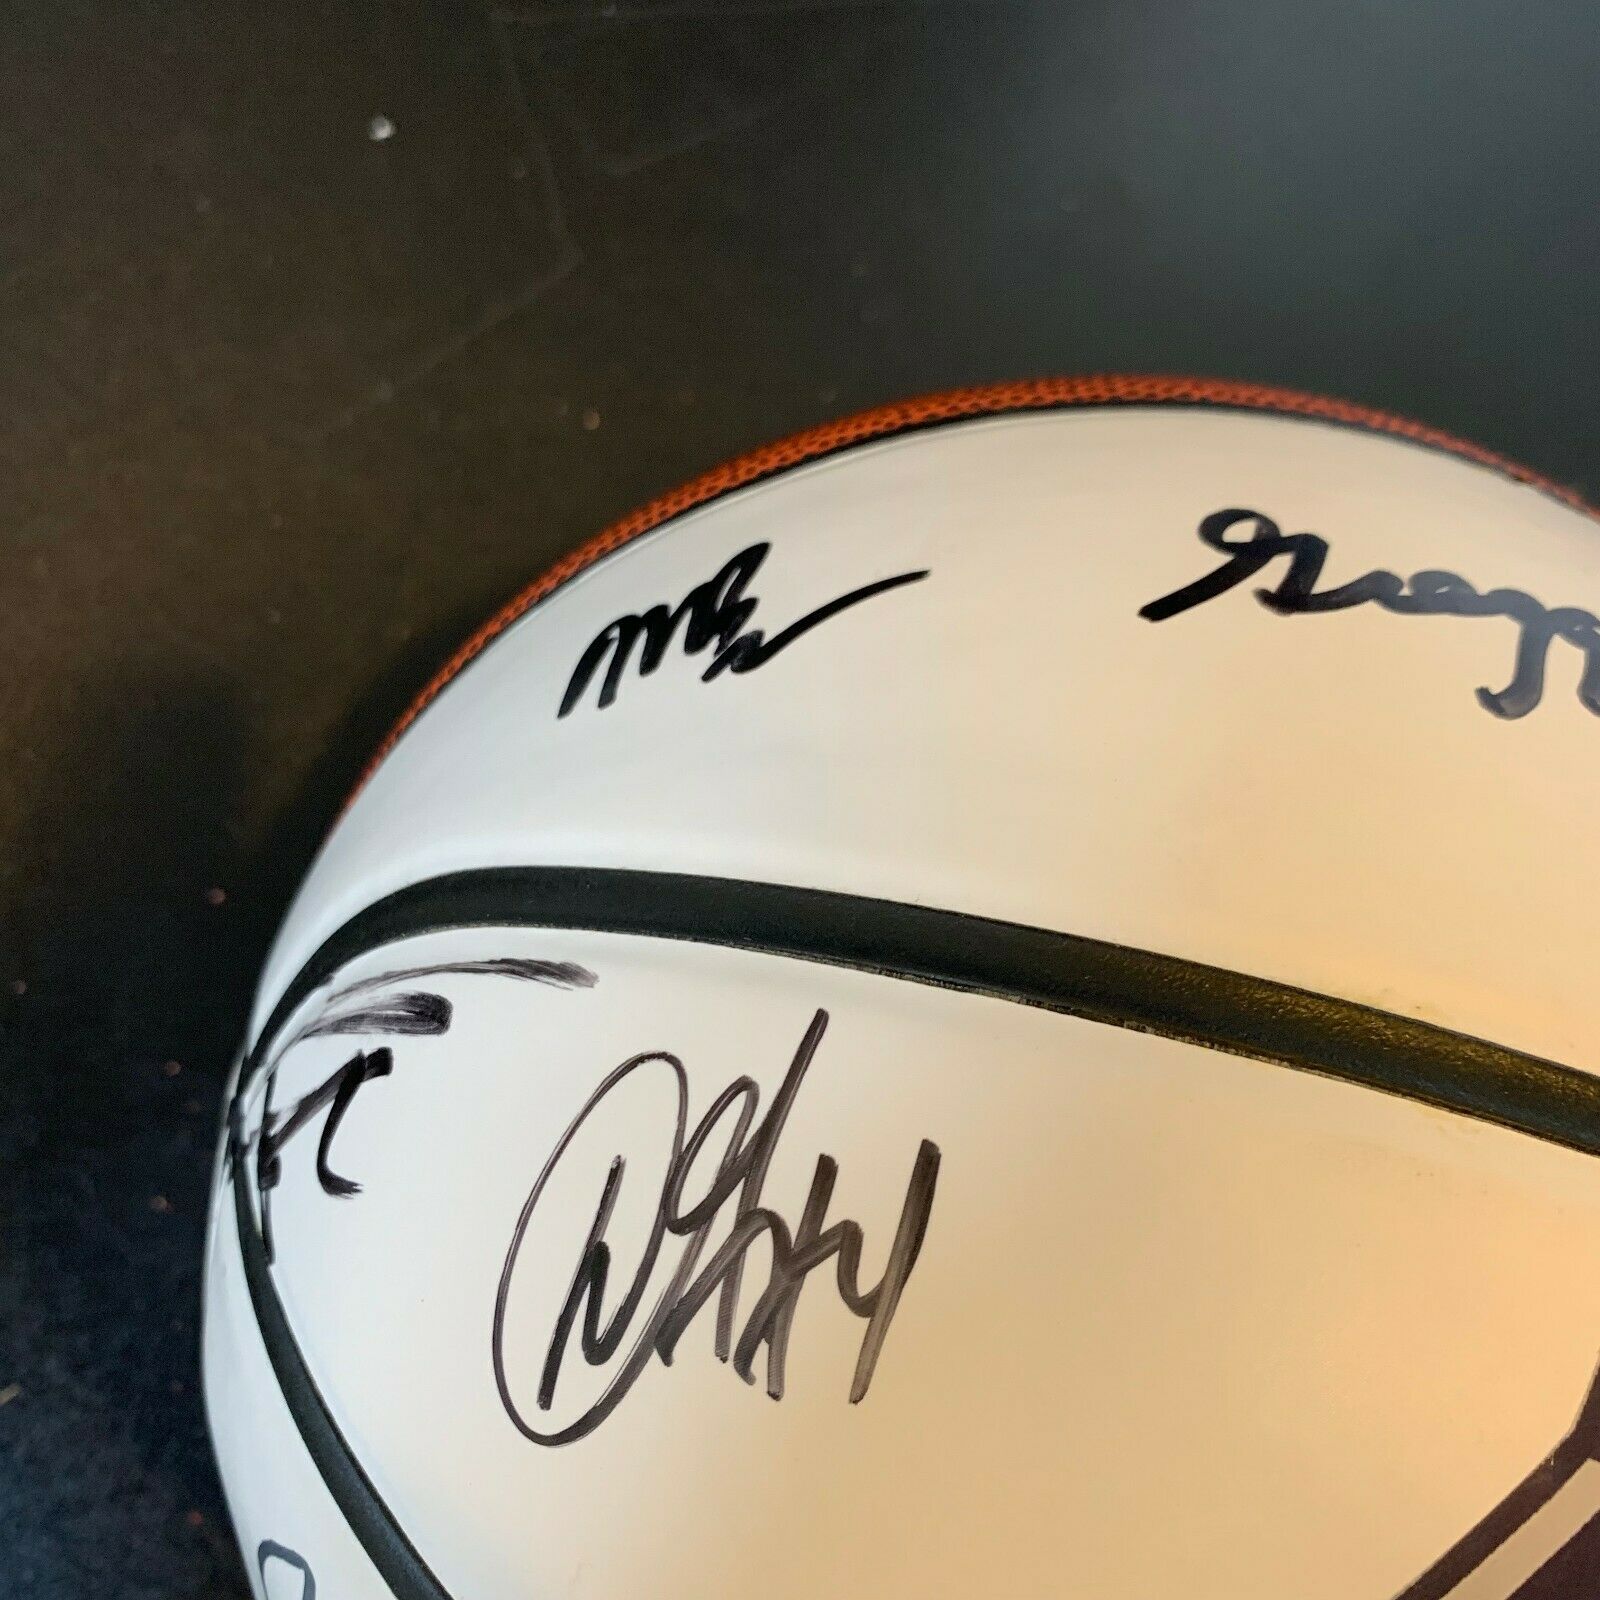 2013-14 San Antonio Spurs NBA Champs Team Signed Basketball Tim Duncan JSA  COA - Autographed Basketballs at 's Sports Collectibles Store